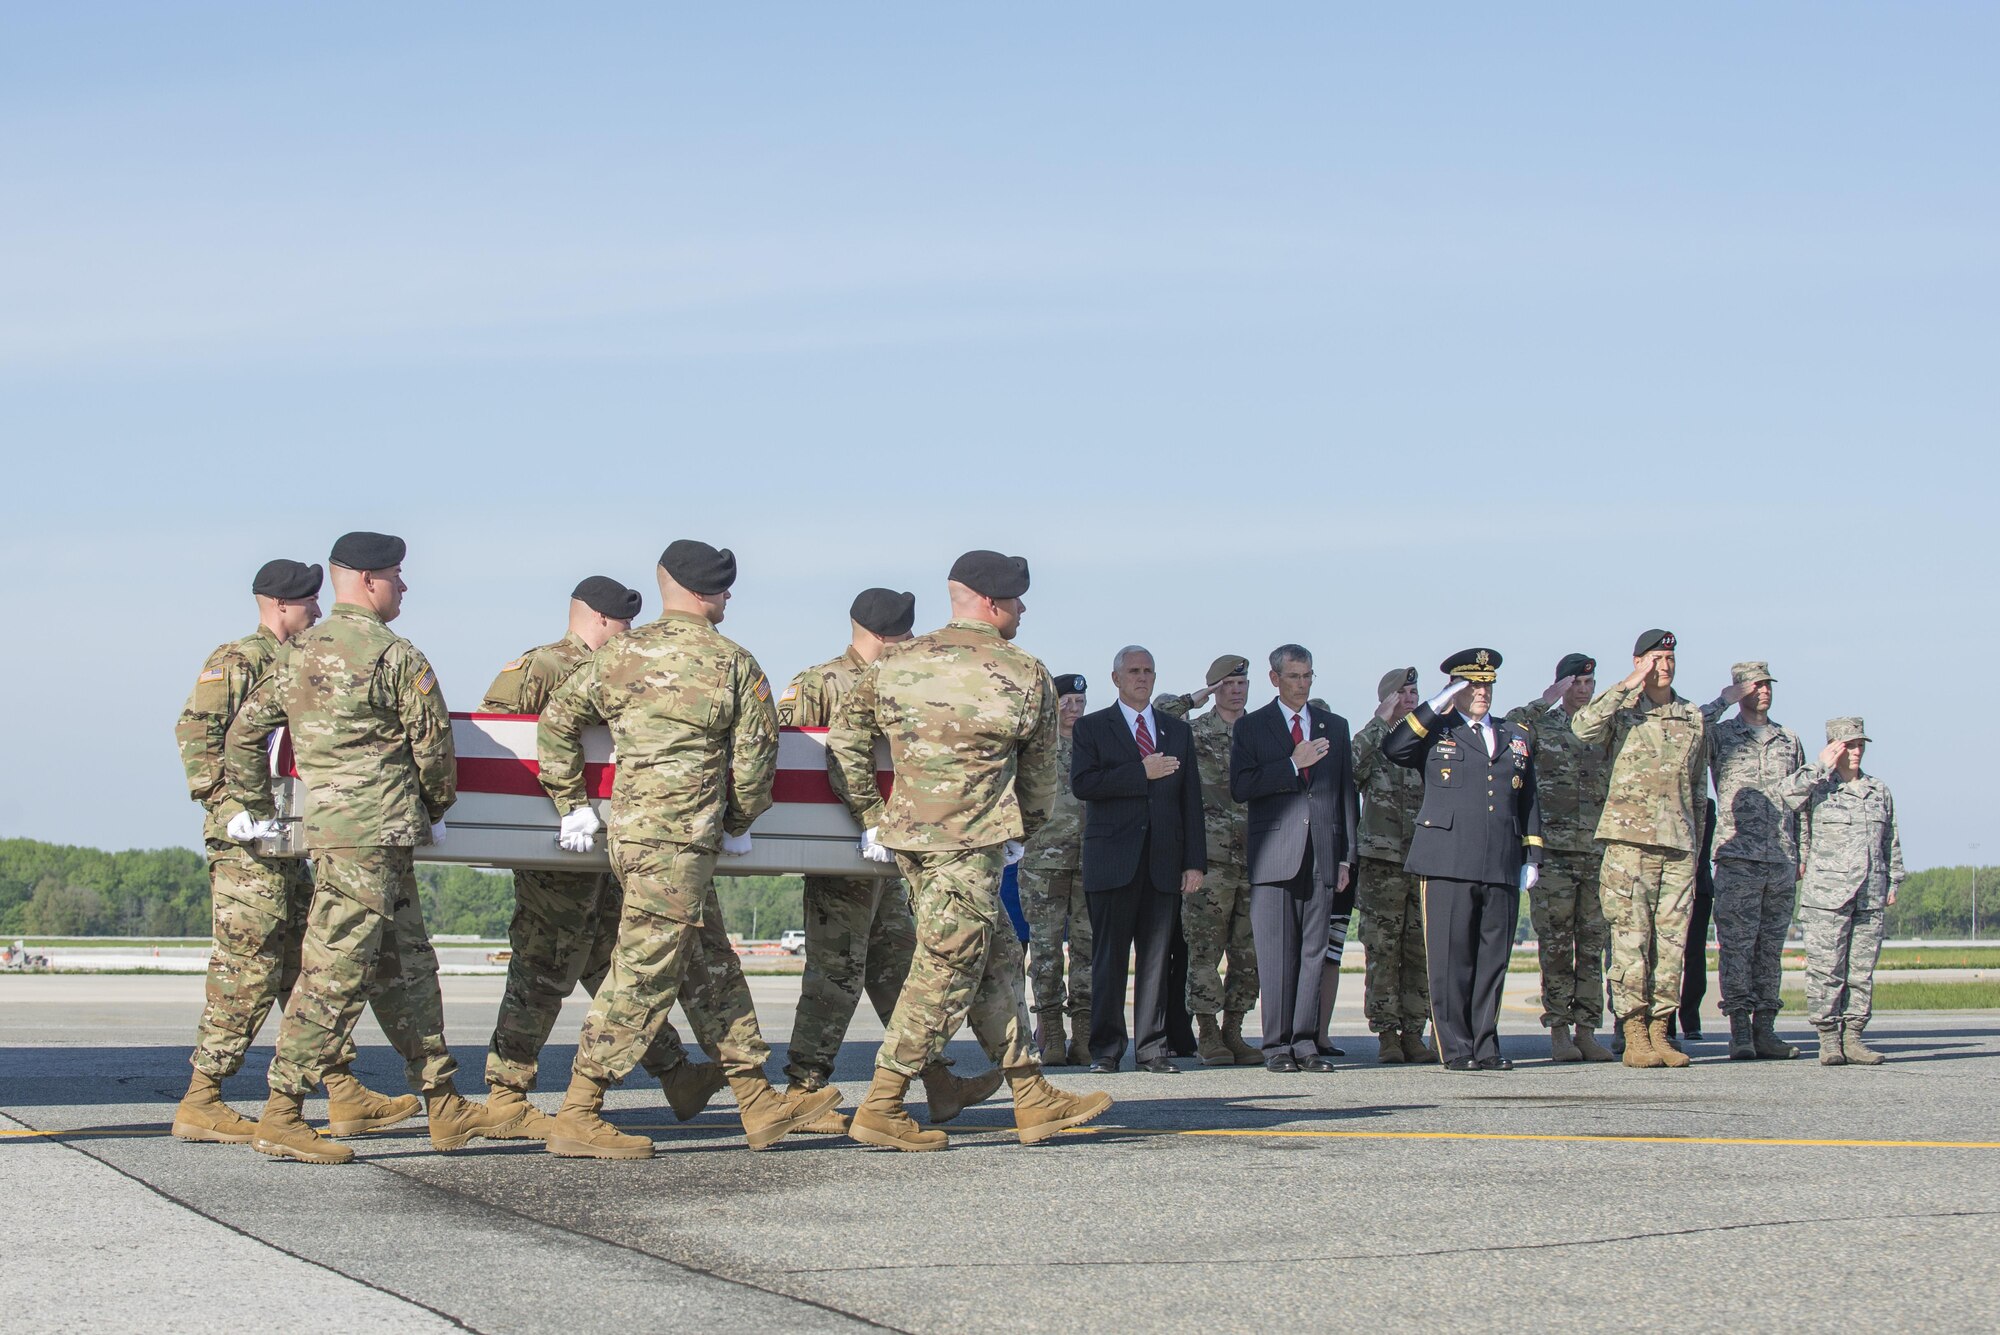 A U.S. Army carry team transfers the remains of Army Sgt. Cameron H. Thomas of Kettering, Ohio, April 28, 2017, at Dover Air Force Base, Del. Thomas was assigned to the 3rd Battalion, 75th Ranger Regiment, Fort Benning, Ga. (U.S. Air Force photo by Staff Sgt. Jared Duhon)